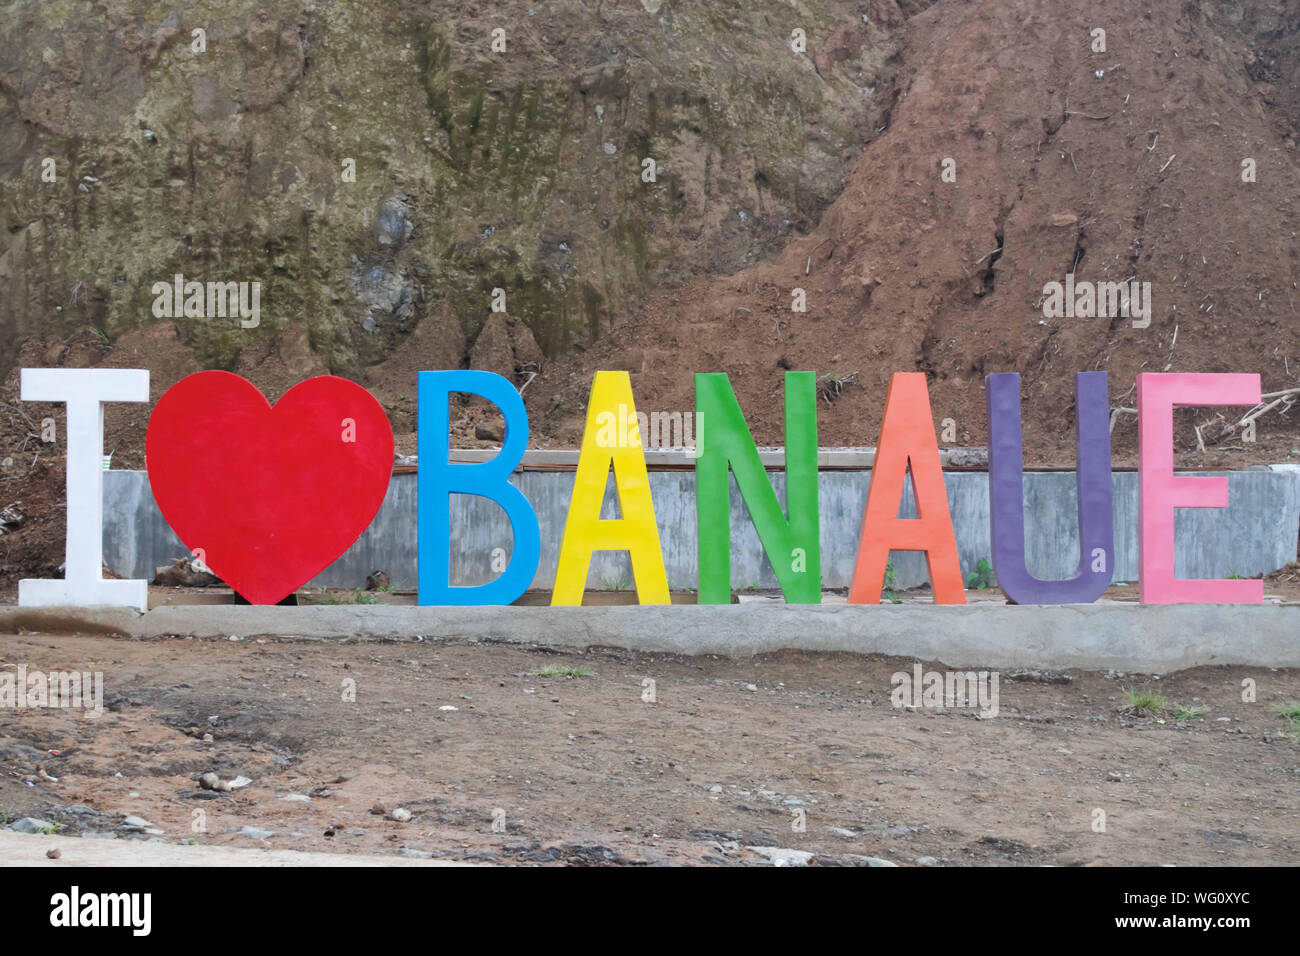 AUGUST 25, 2019-BANAUE IFUGAO PHILIPPINES : Large letterings that spelled ' I HEART BANAUE' displayed at the entrance of the Banaue town. Colourful le Stock Photo